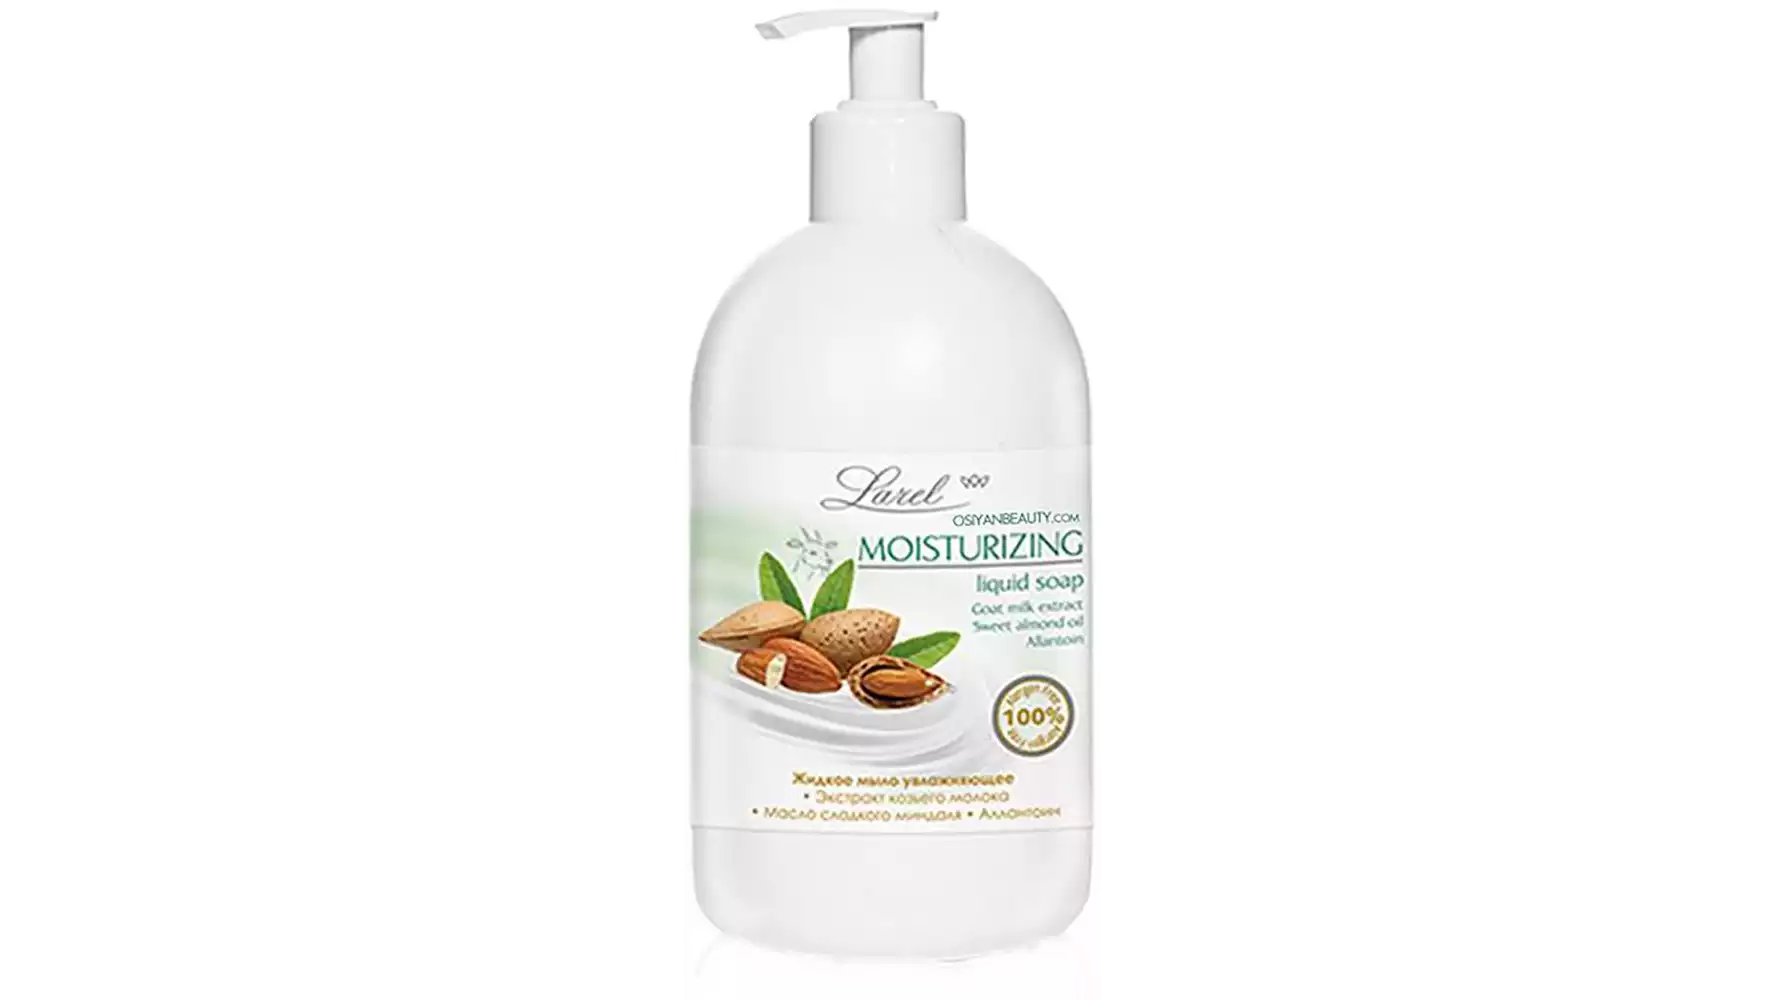 Larel Moisturizing Liquid Soap With Goat Milk Extract Sweet Almond Oil (Made In Europe) (500ml)